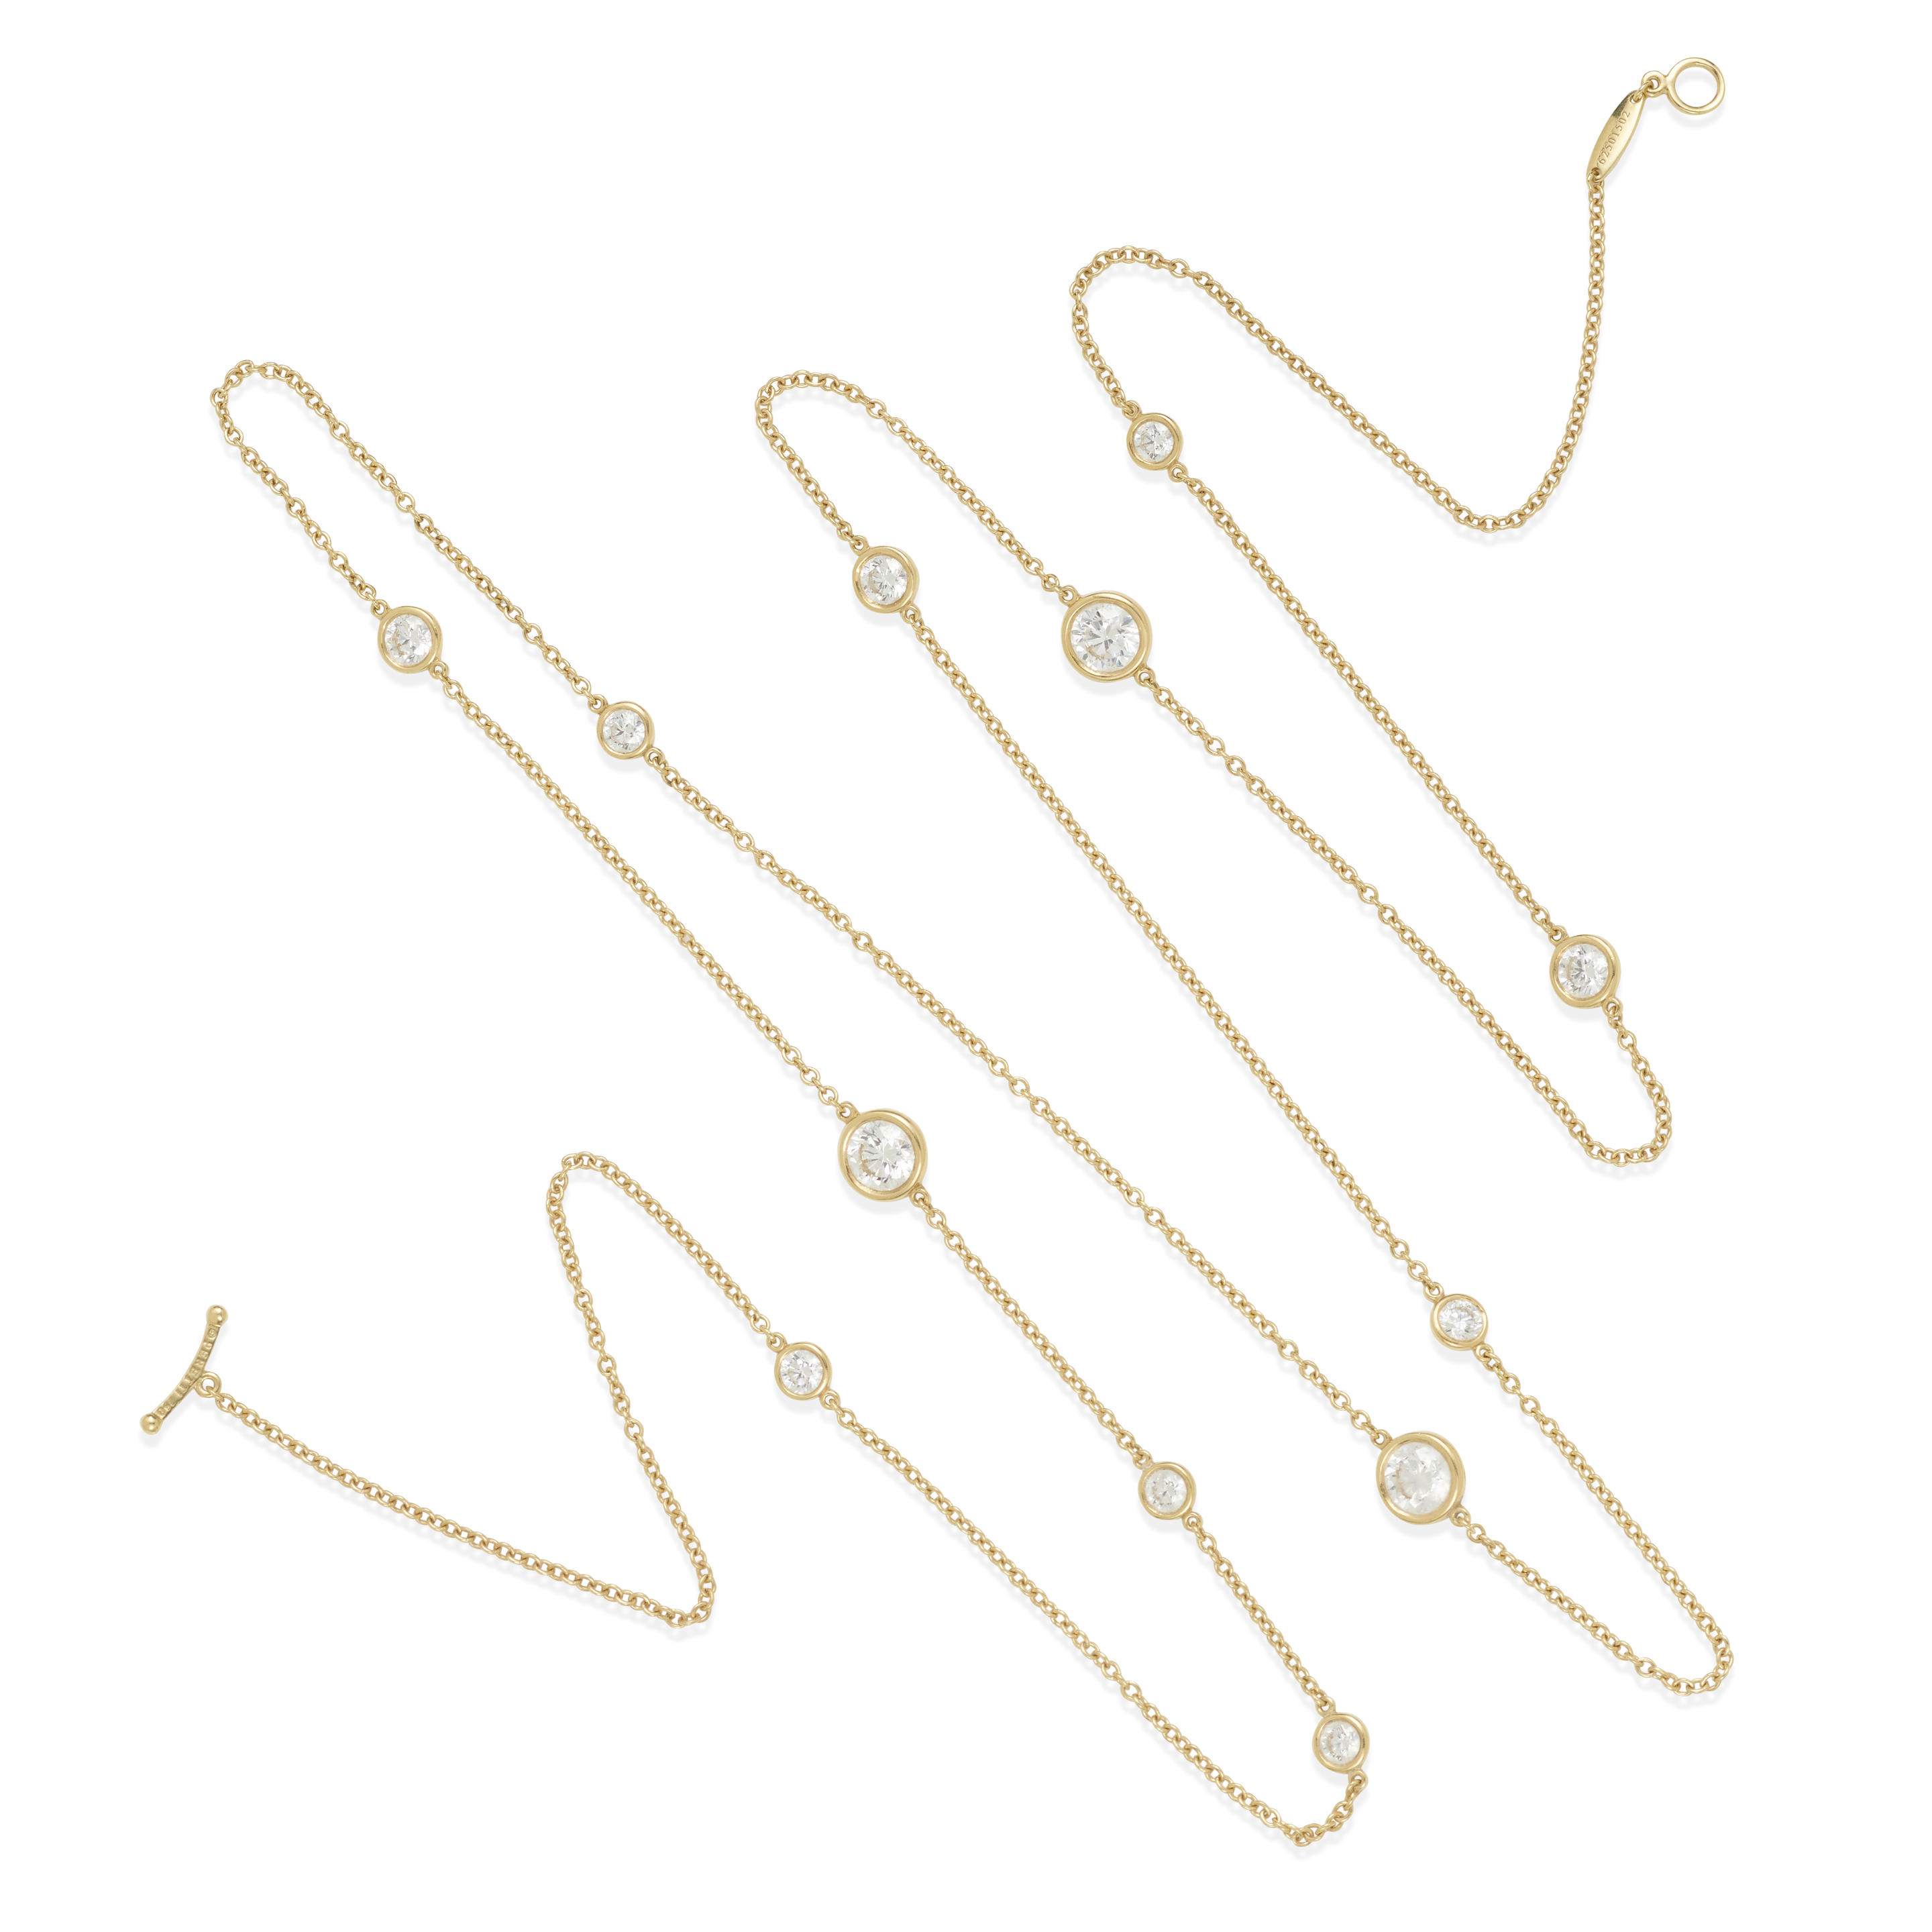 ELSA PERETTI FOR TIFFANY & CO.: AN 18K GOLD AND DIAMOND 'DIAMONDS BY THE...